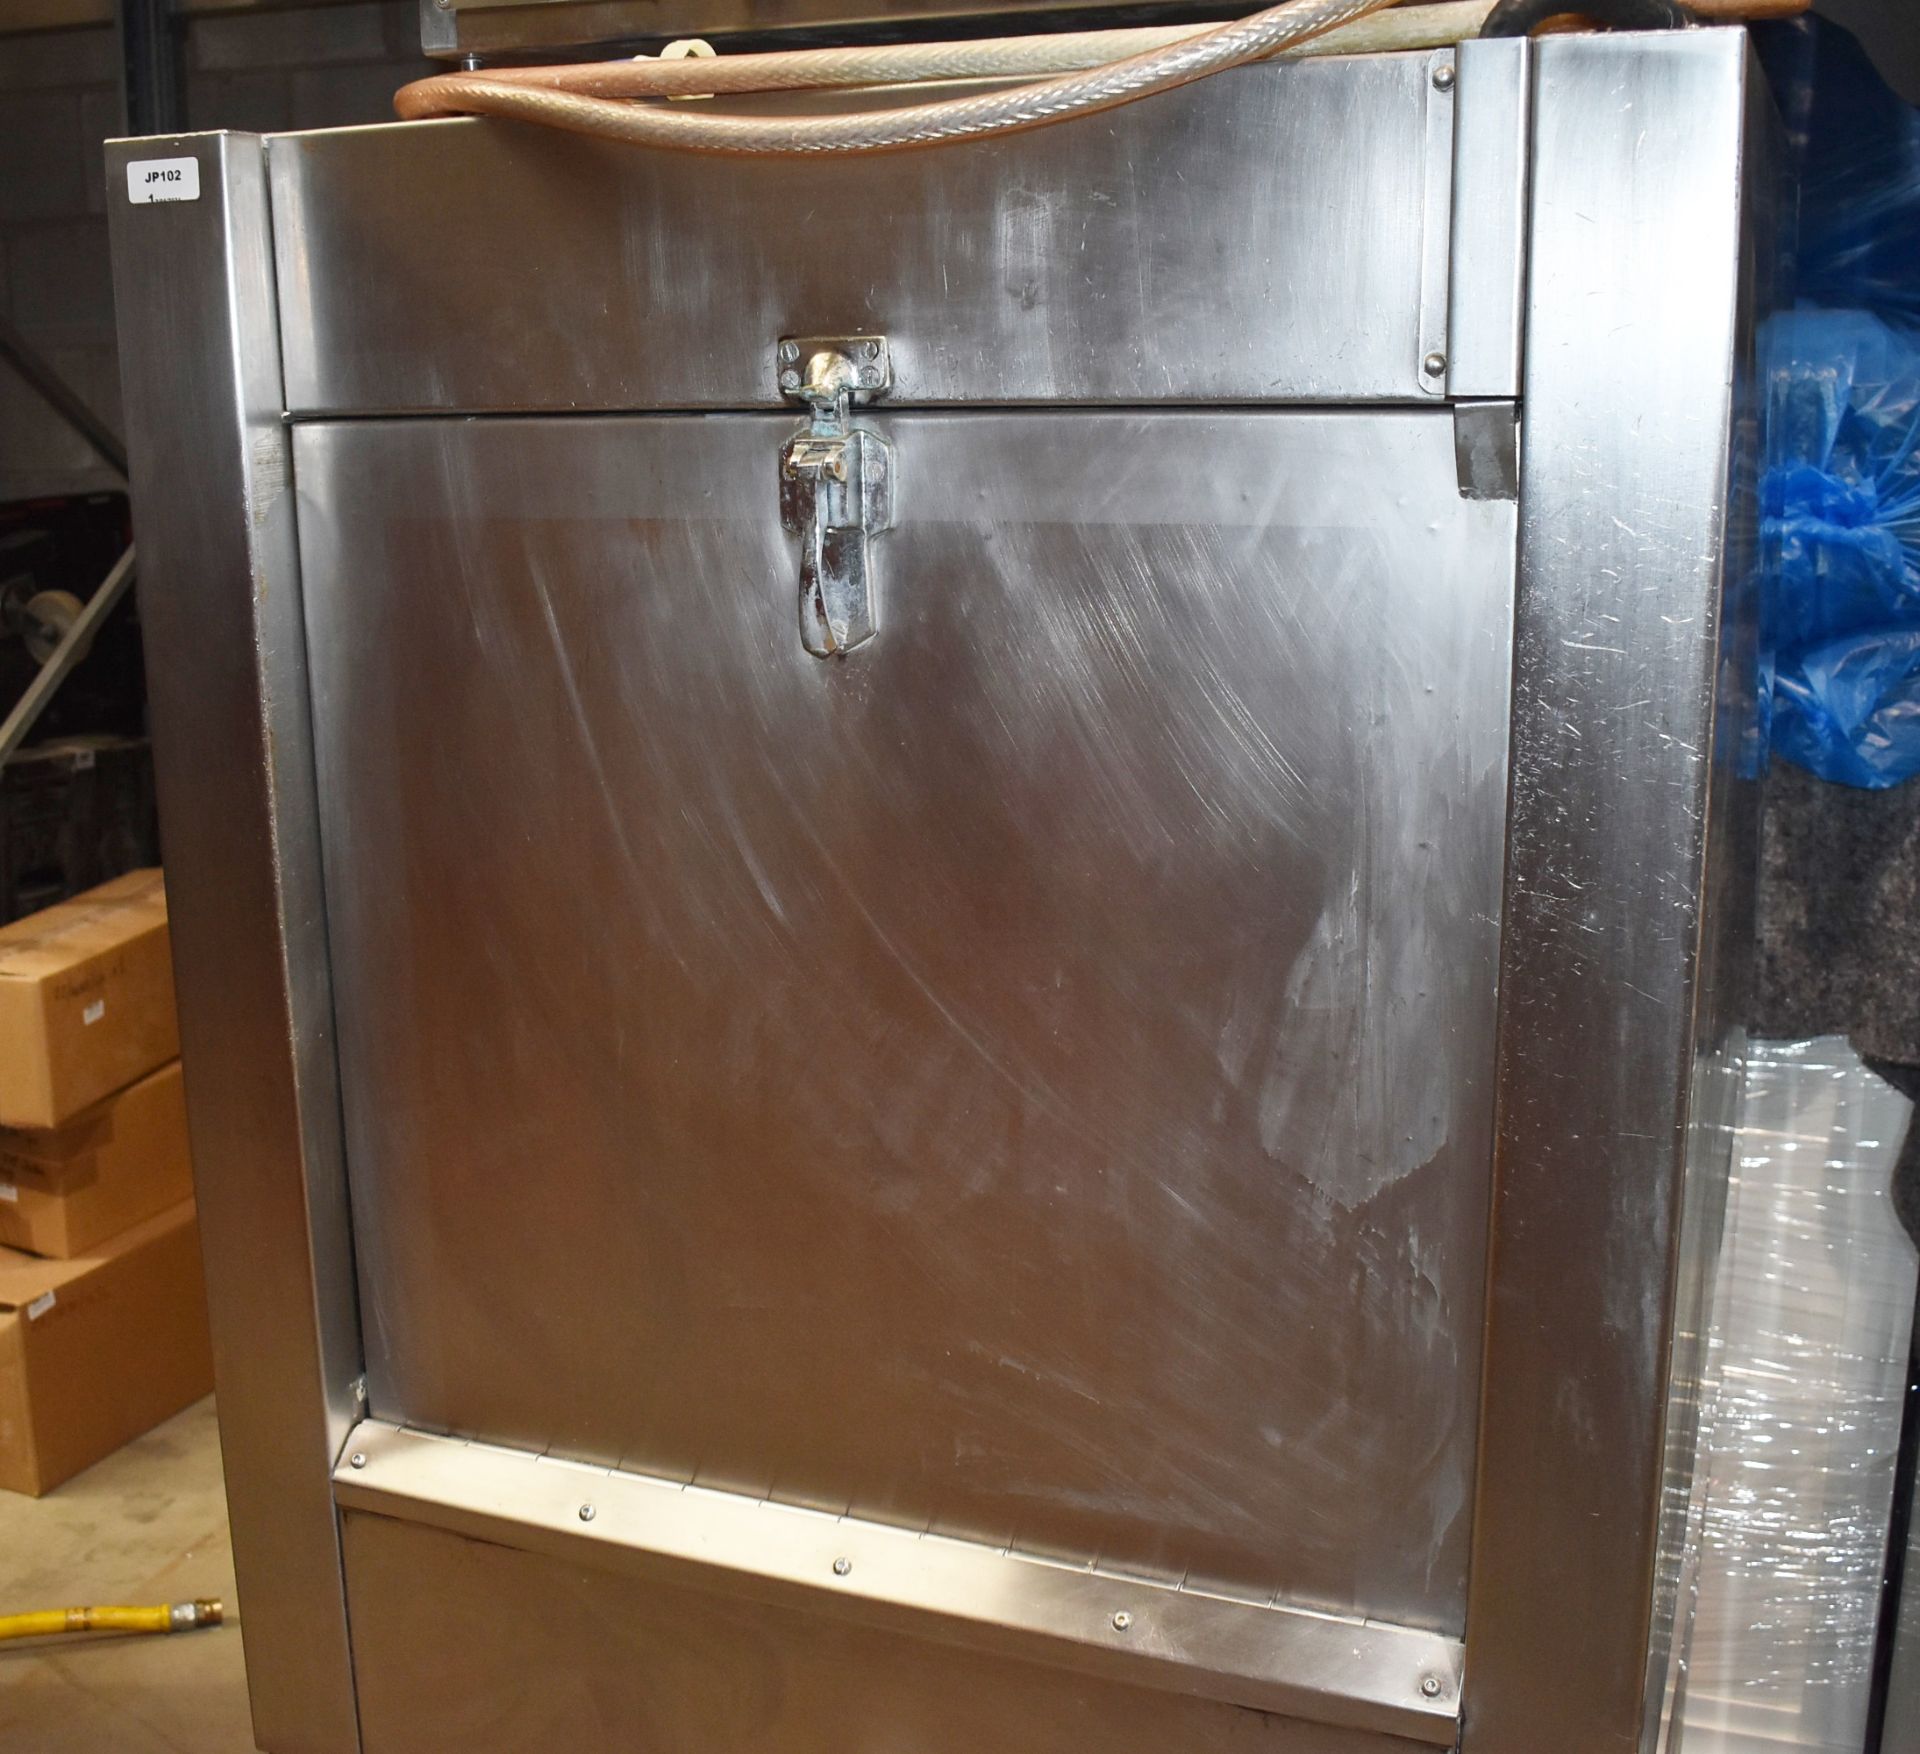 1 x Oliver Douglas Panamatic 500 Industrial Washing Machine For Commercial Kitchen Environments - St - Image 12 of 15